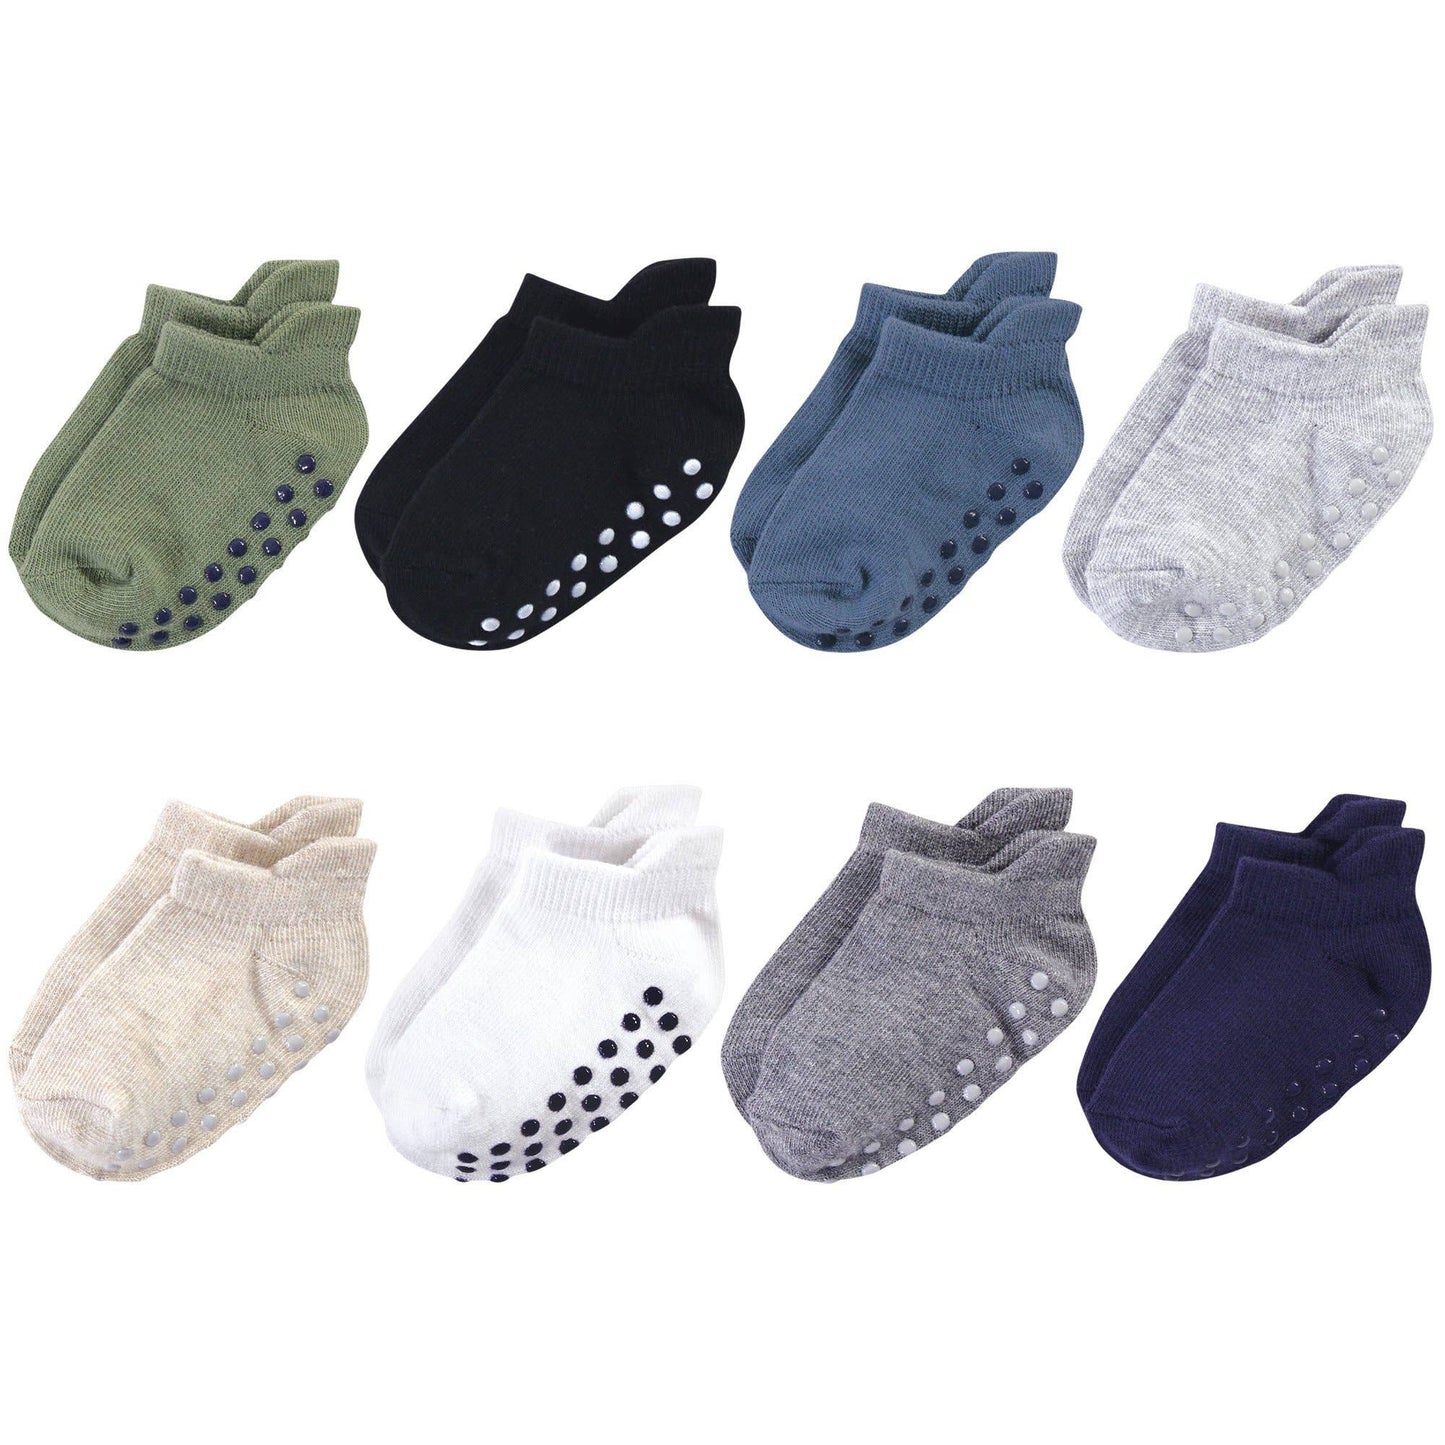 Touched by Nature Organic Cotton Socks with Non-Skid Gripper